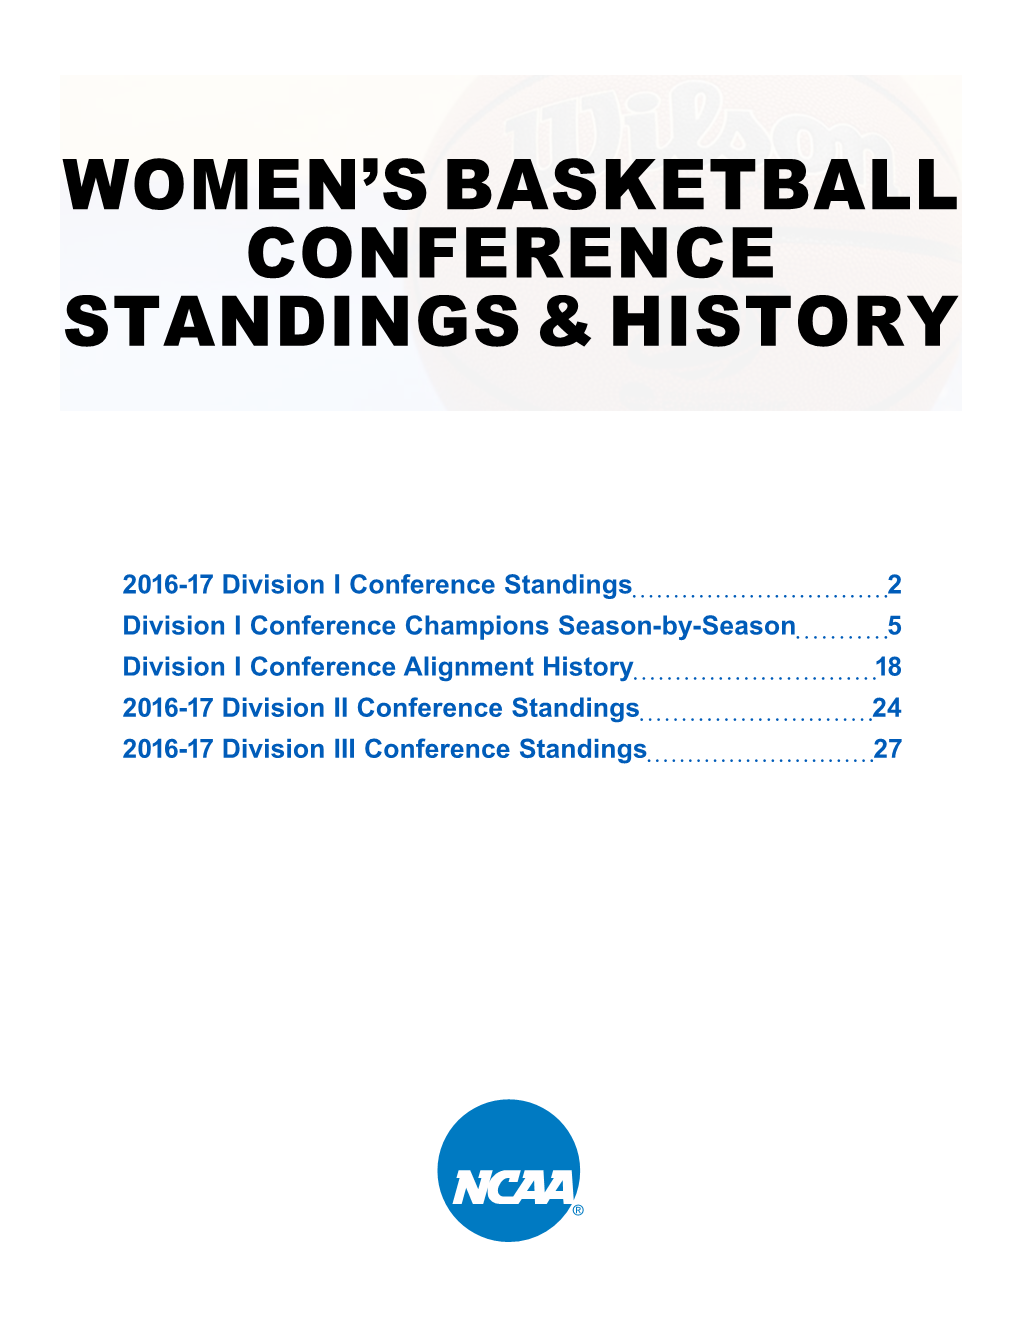 Women's Basketball Conference Standings & History